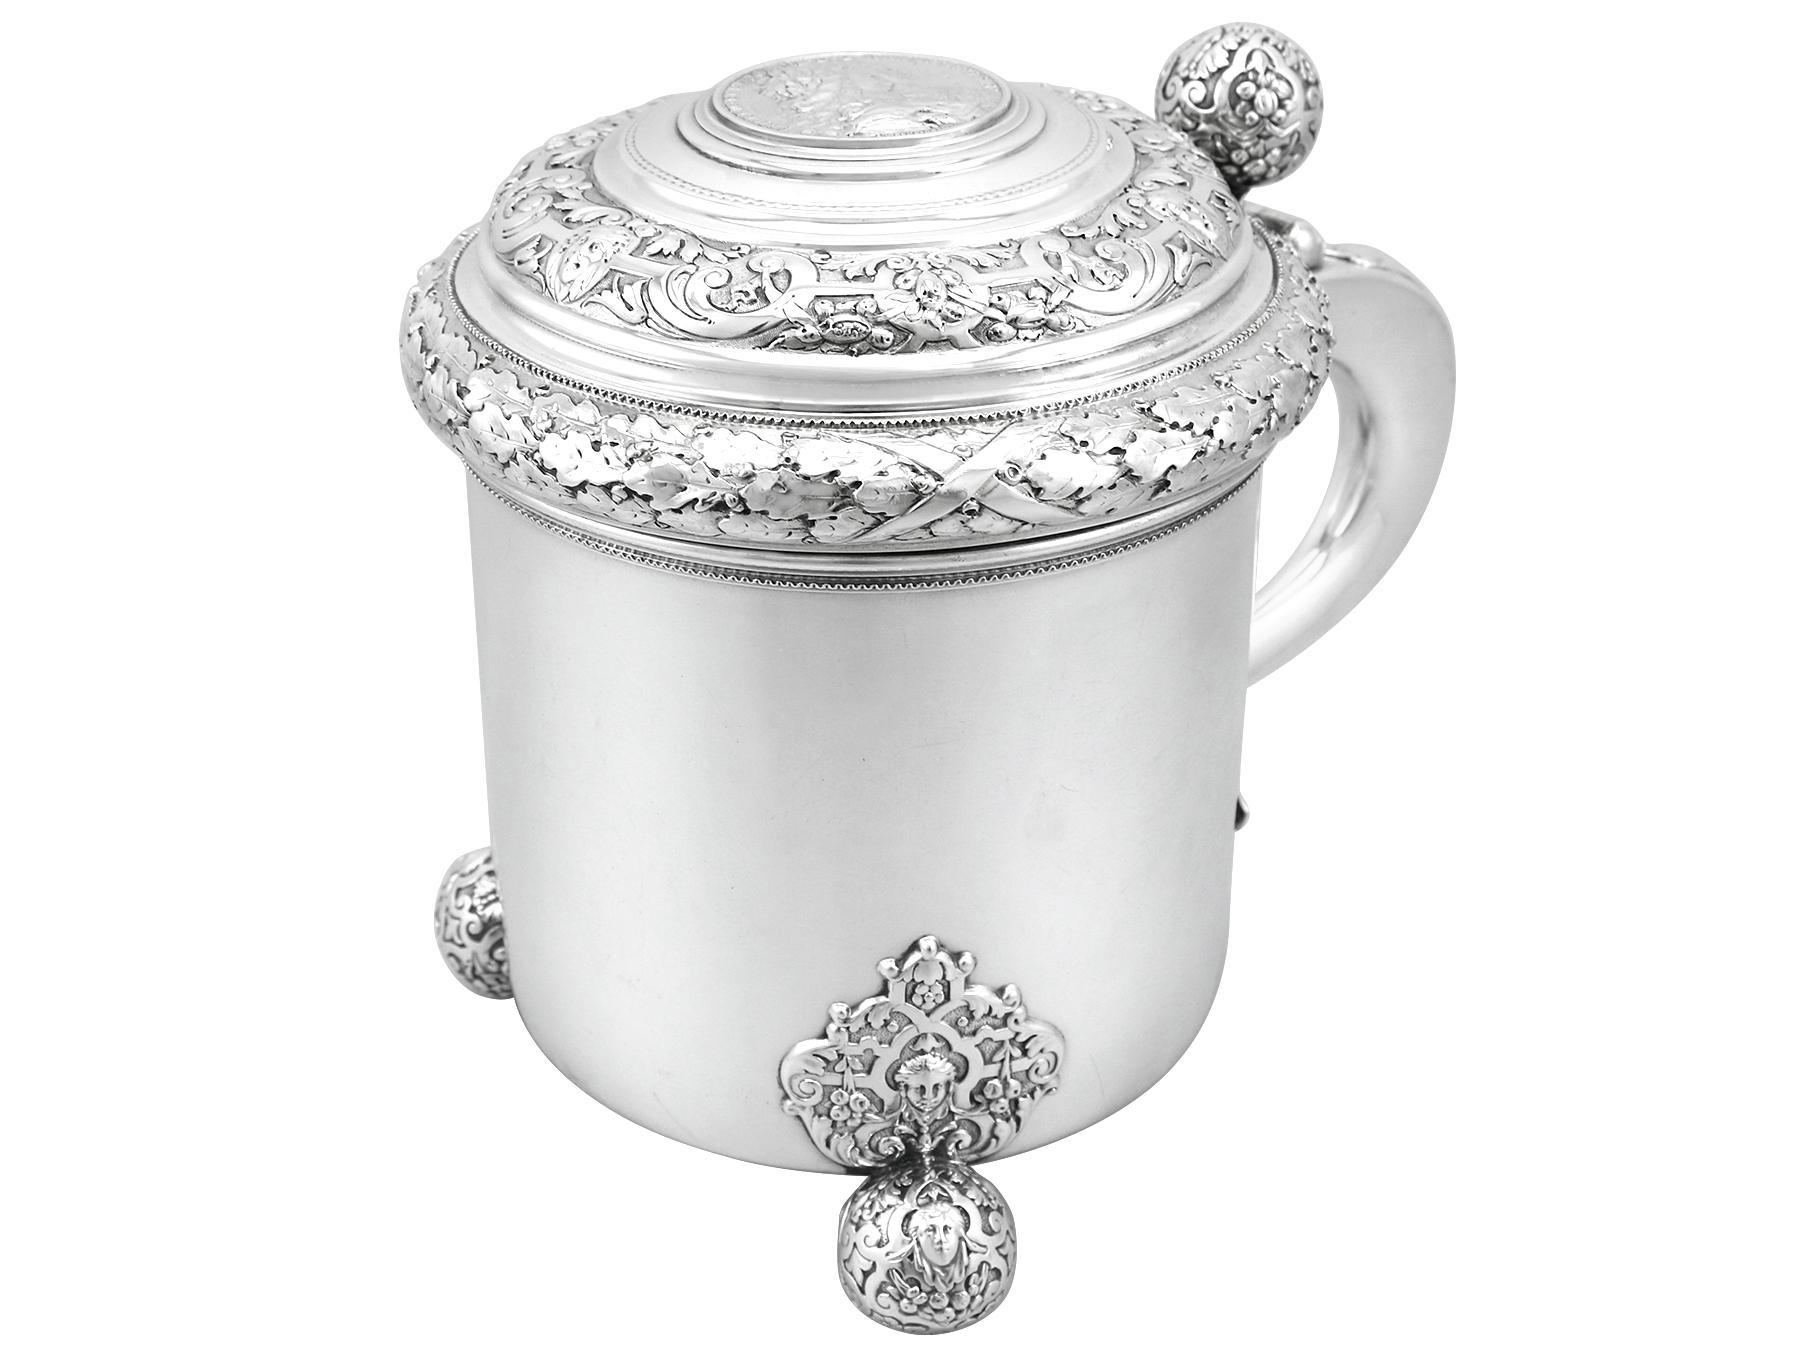 Antique Swedish Silver Peg Tankard In Excellent Condition For Sale In Jesmond, Newcastle Upon Tyne